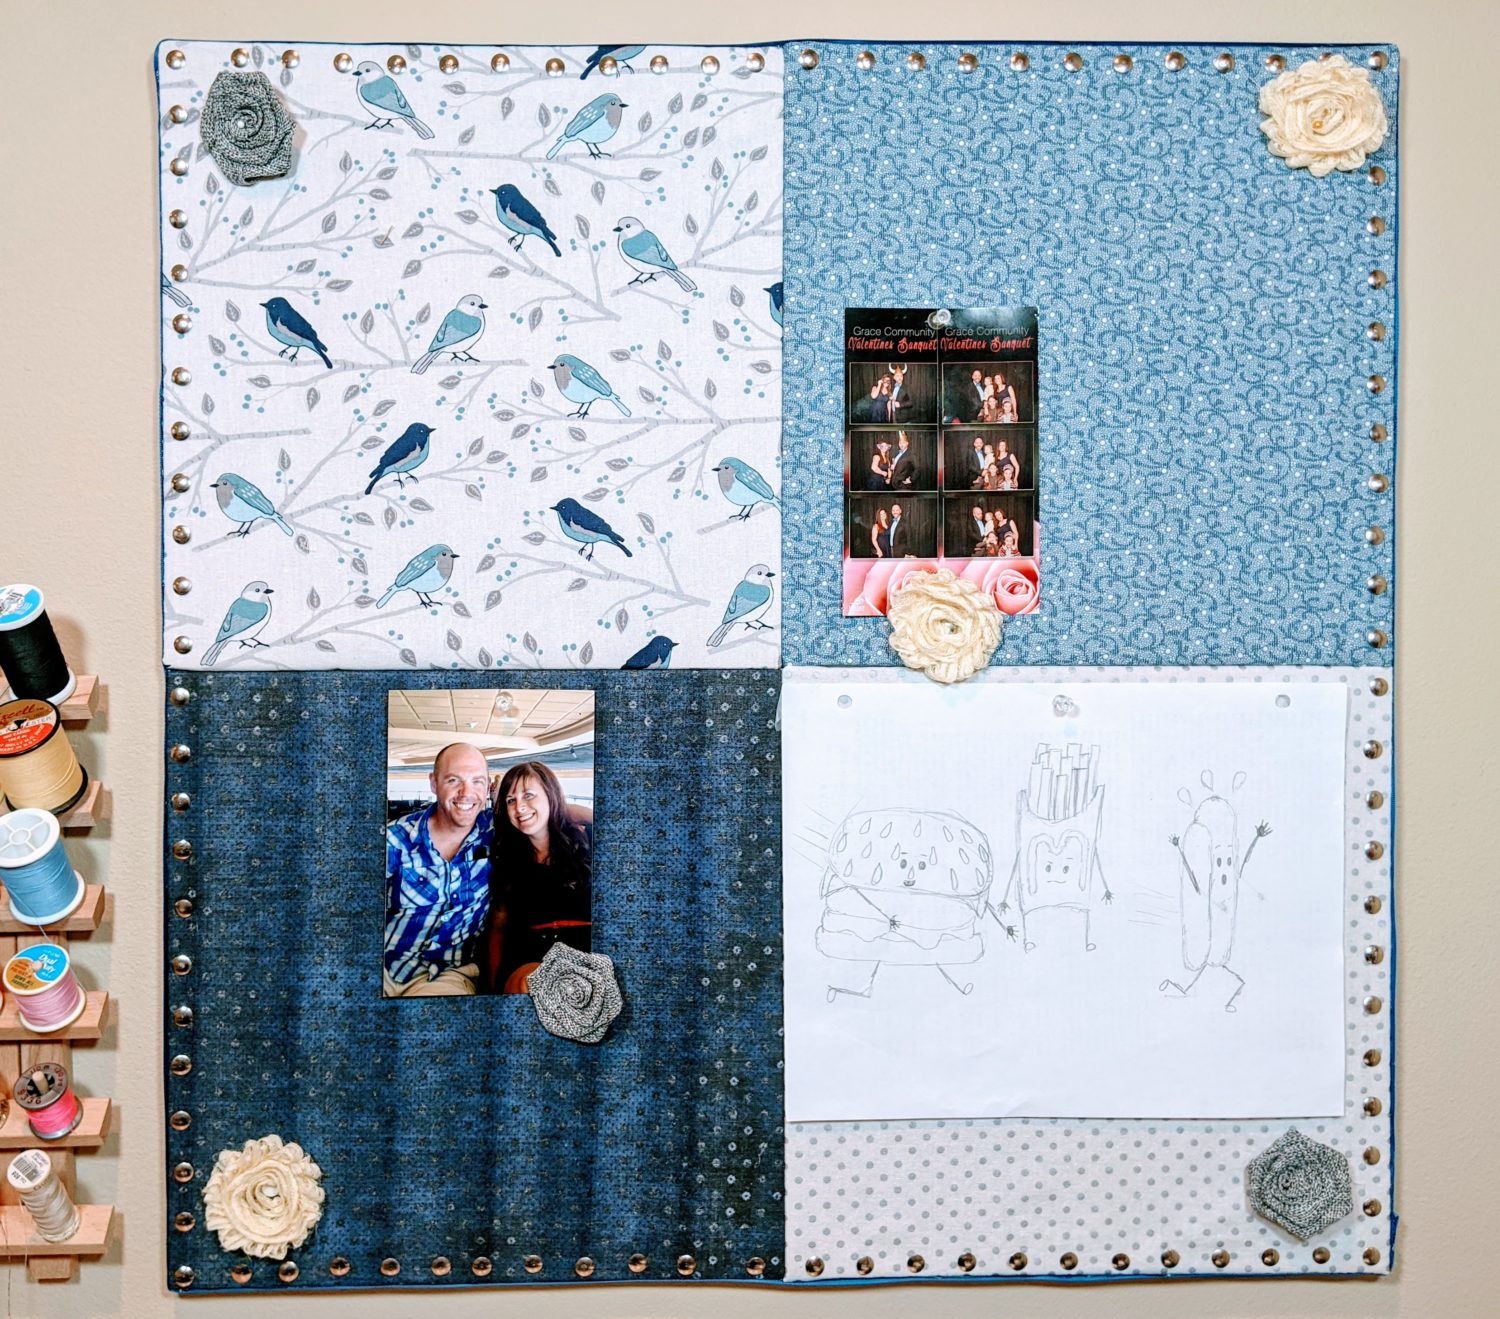 DIY corkboard wall: What you need to know